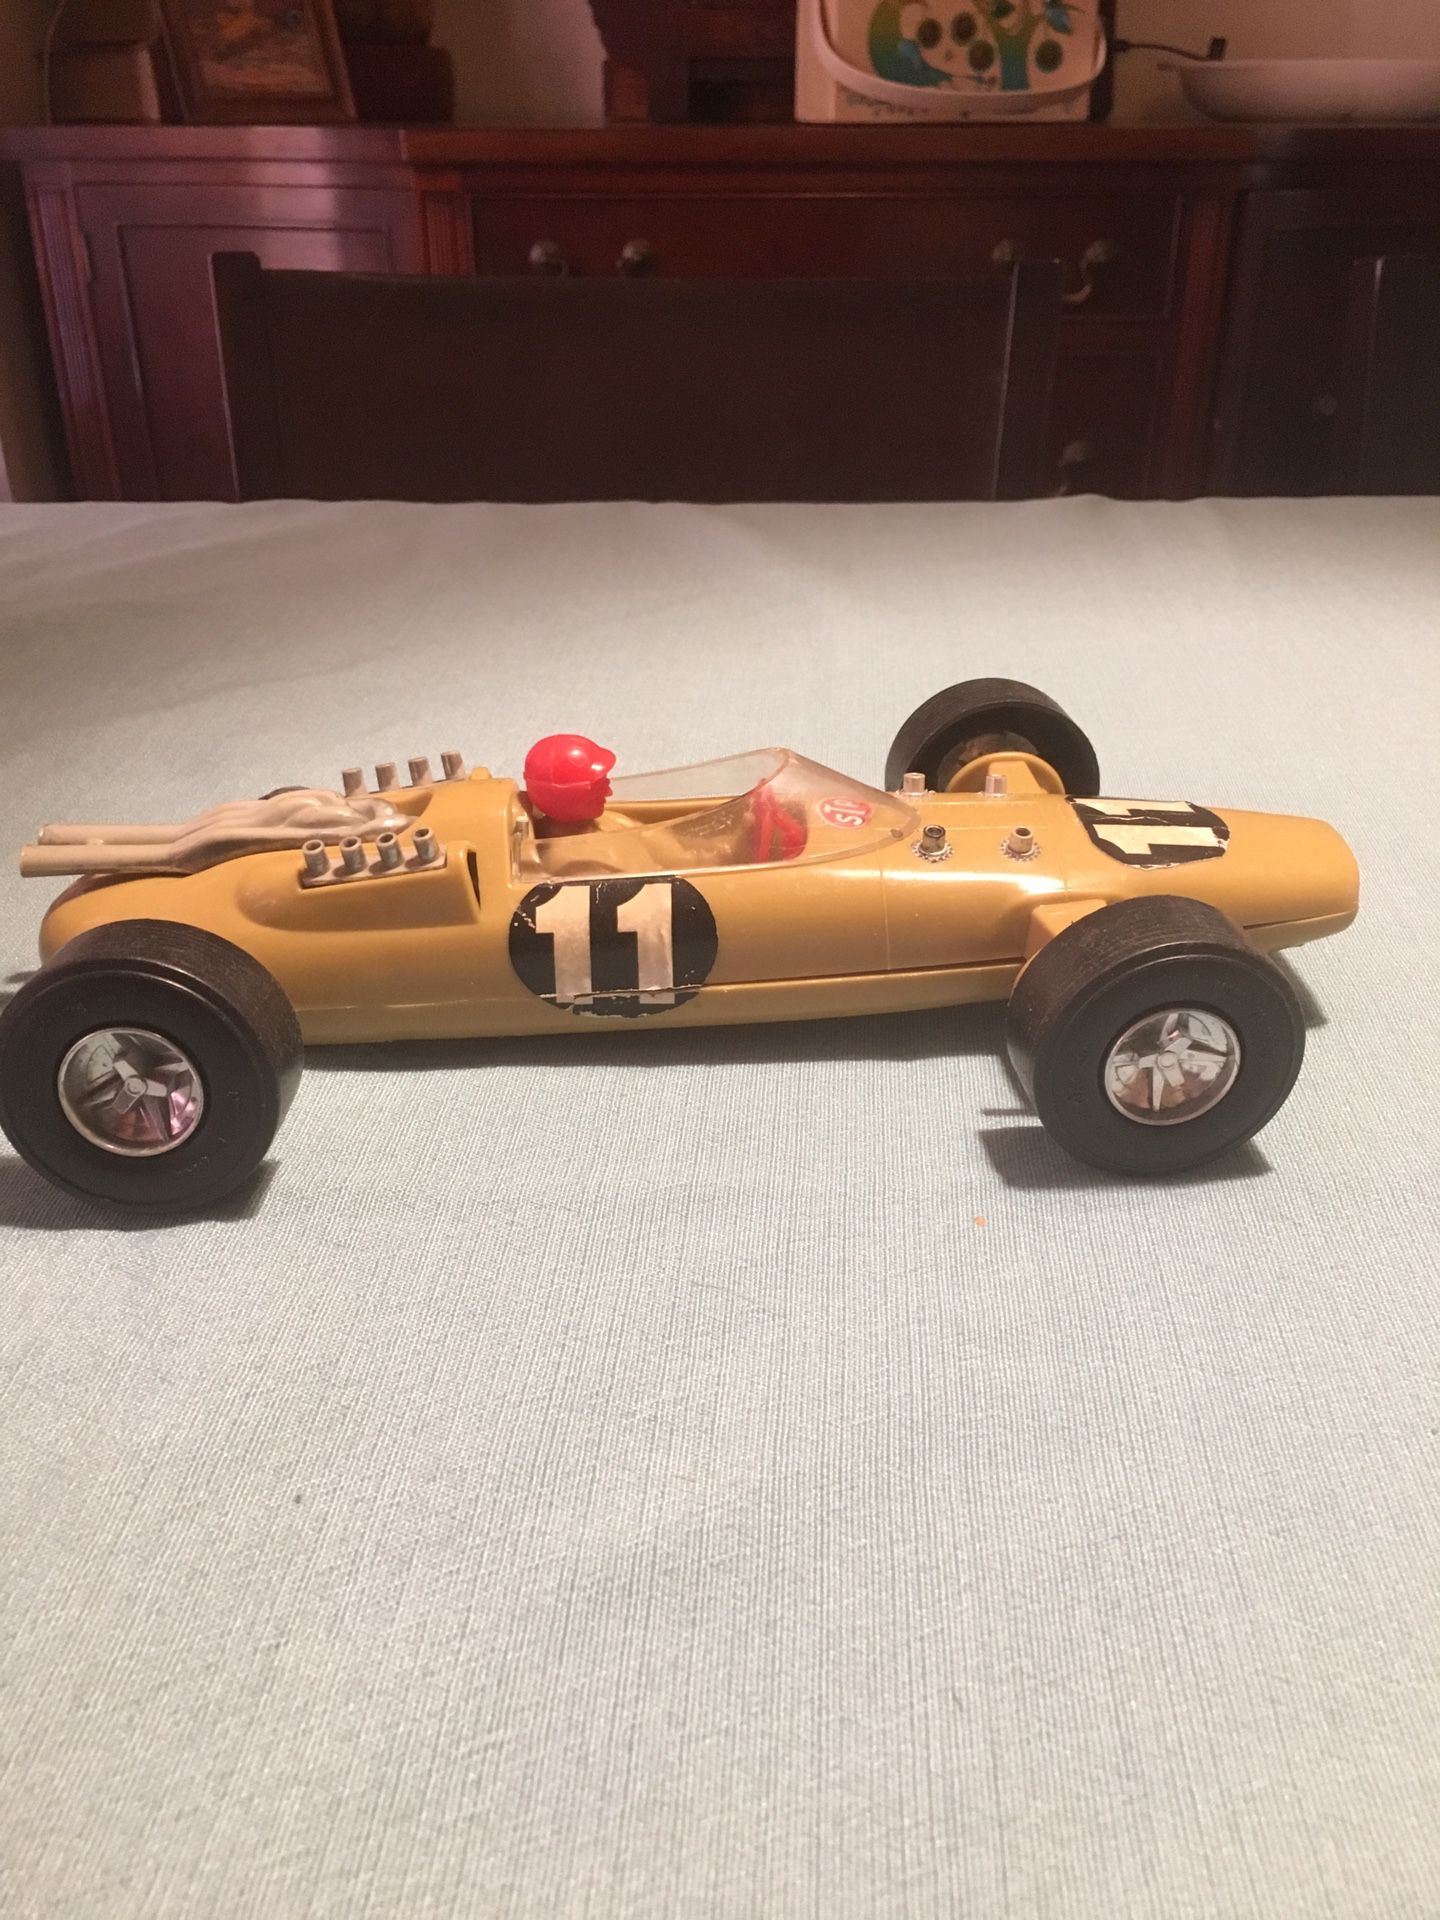 Highly Collectible Vintage Indy Race Car from Aurora Toys